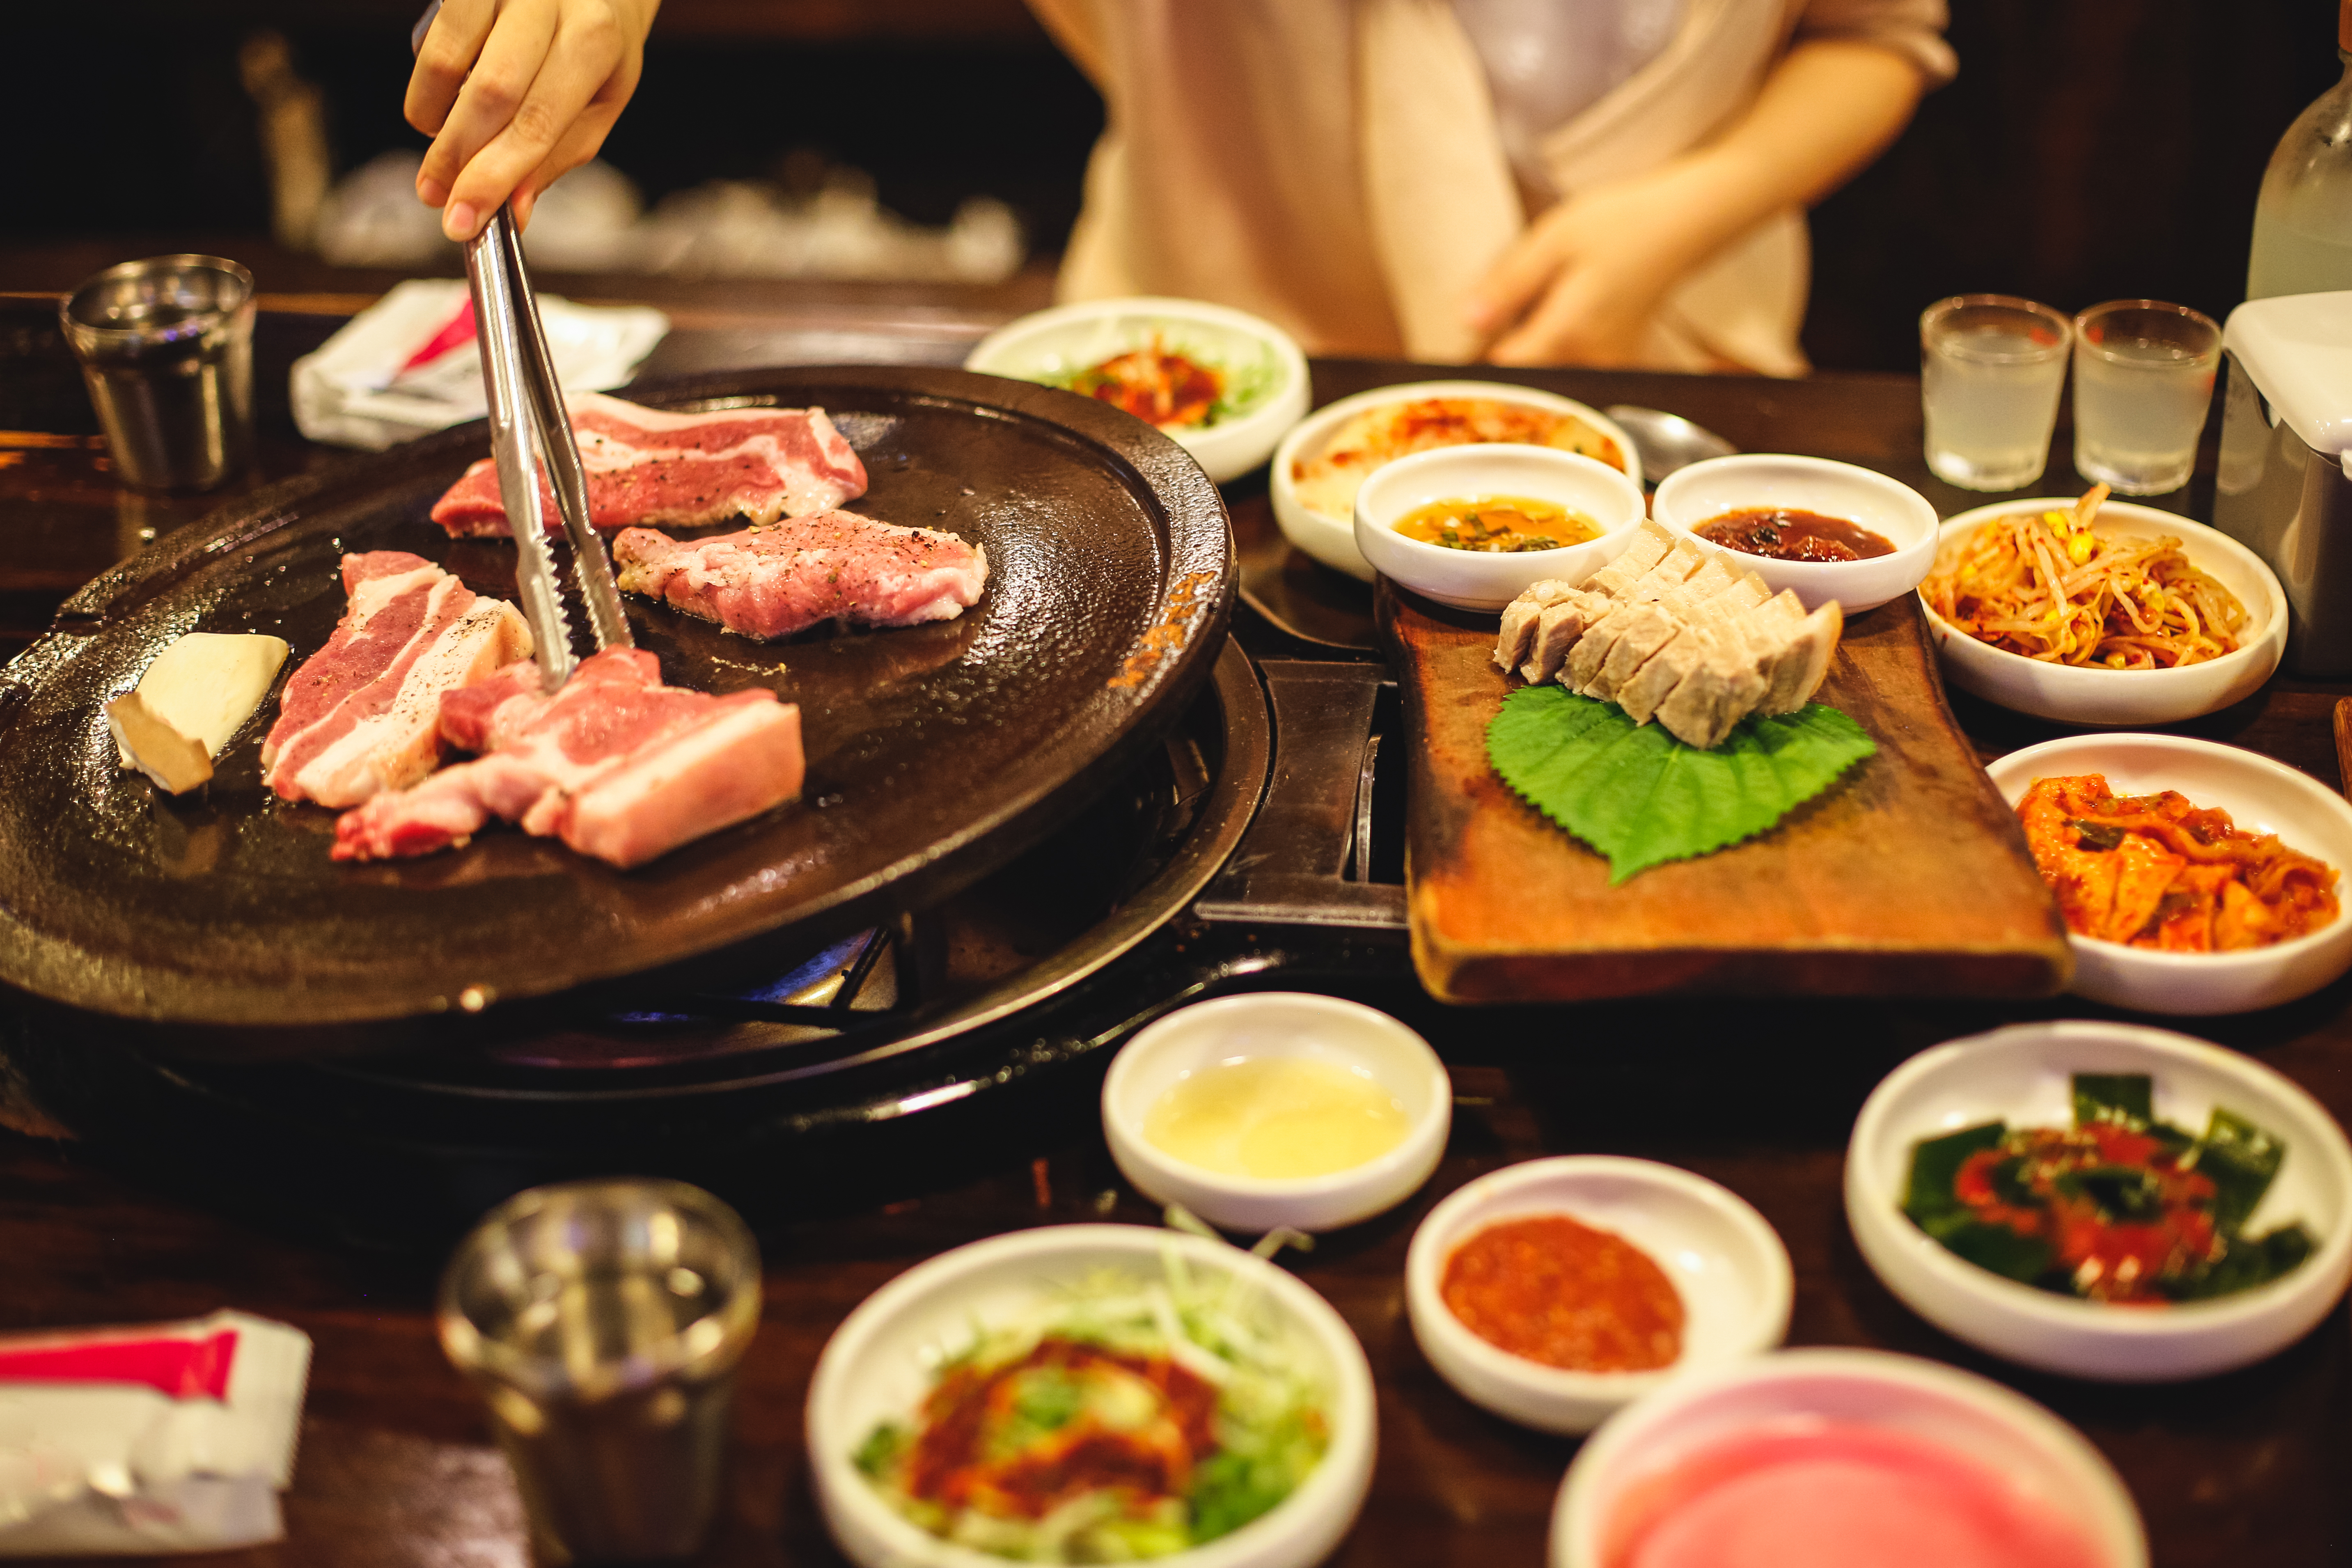 A Korean barbecue setup | Source: Getty Images